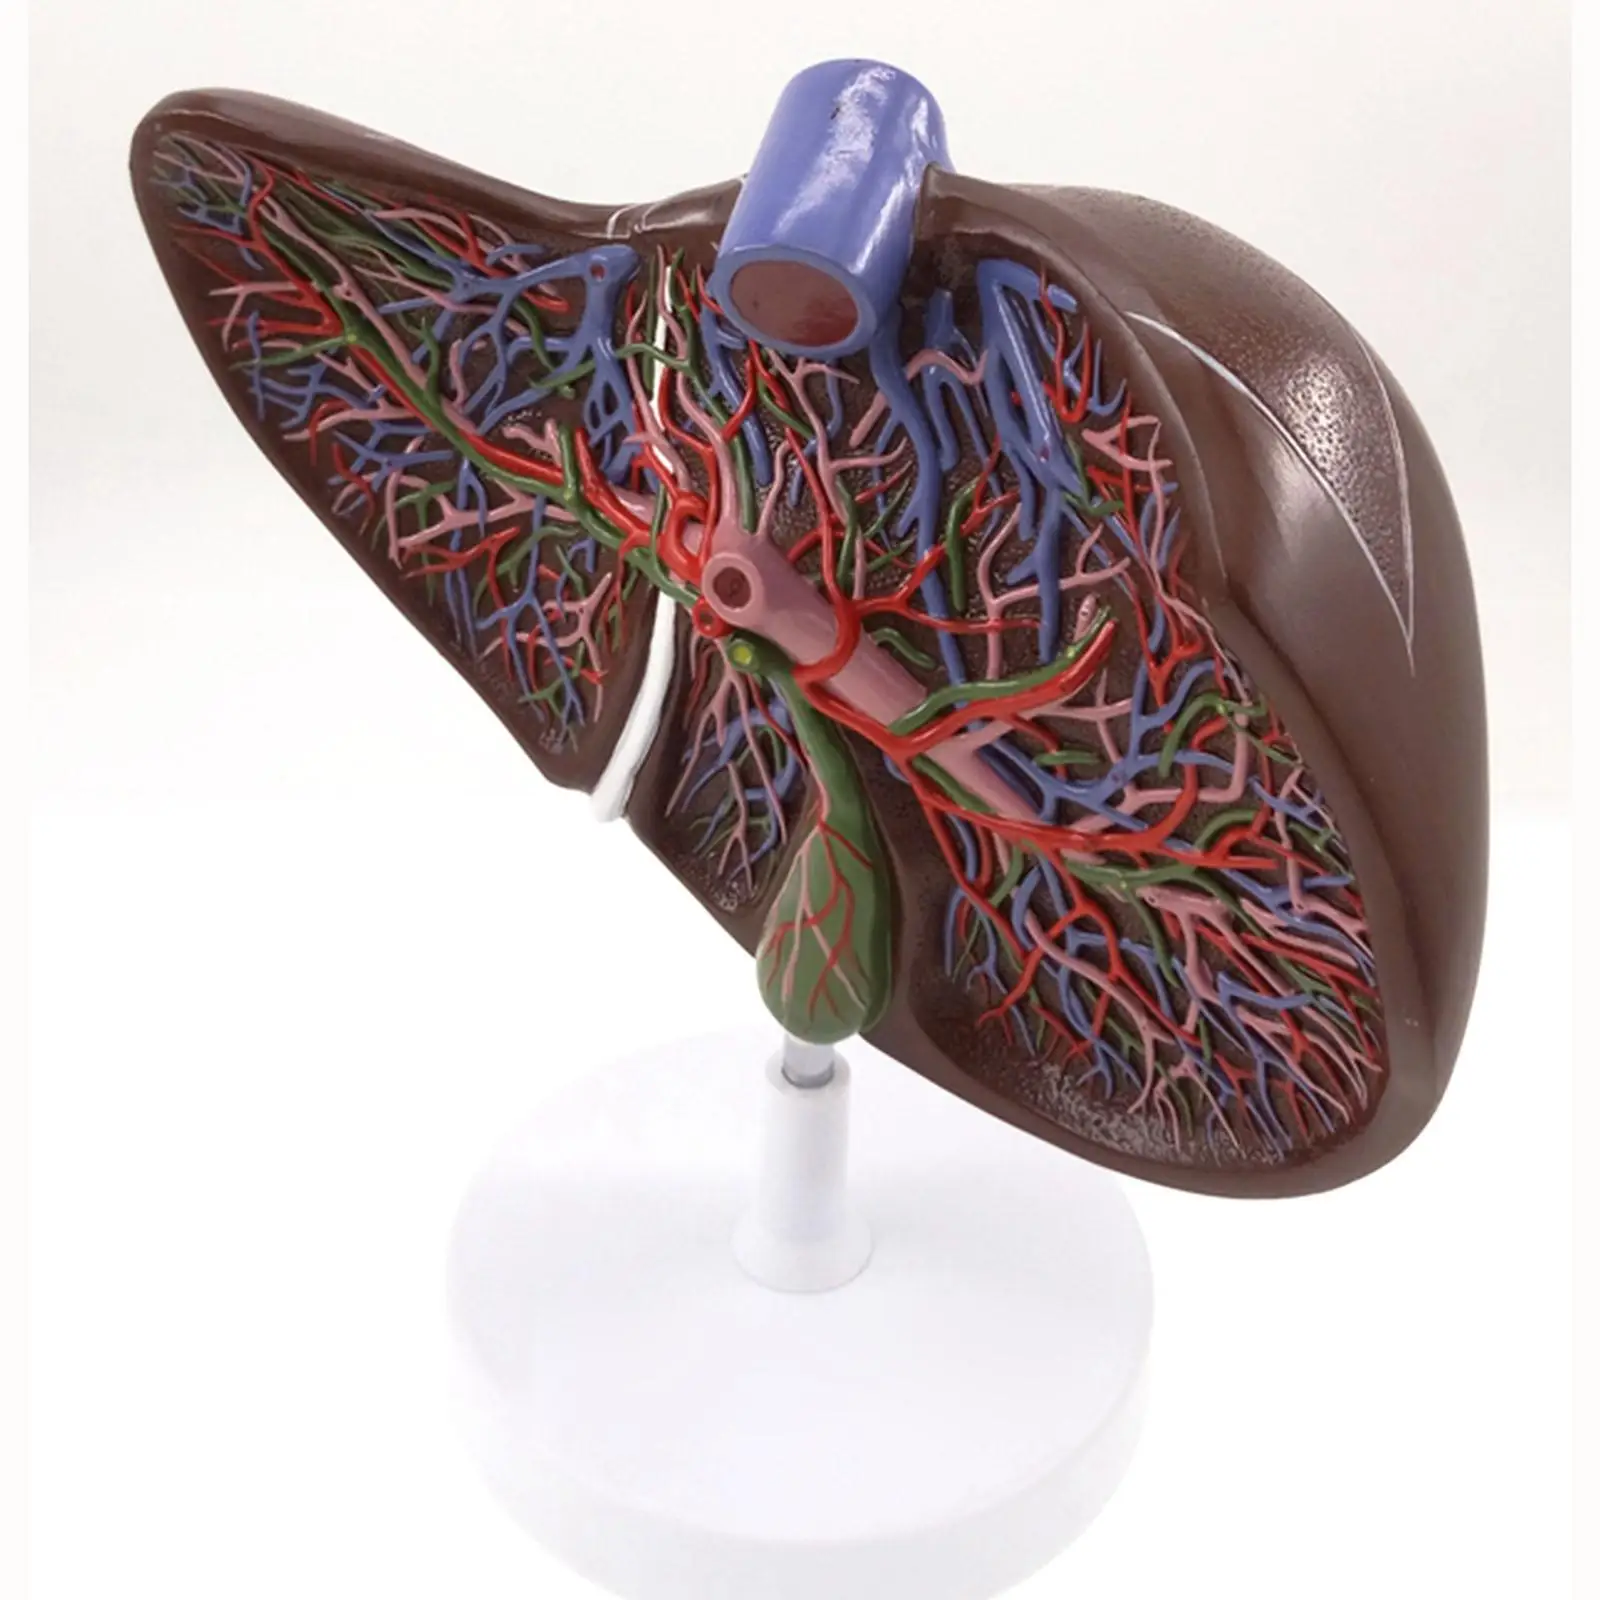 Human Liver Medical Anatomy Model 1.5X Life Size With Vessel Simulation Display Teaching Resources